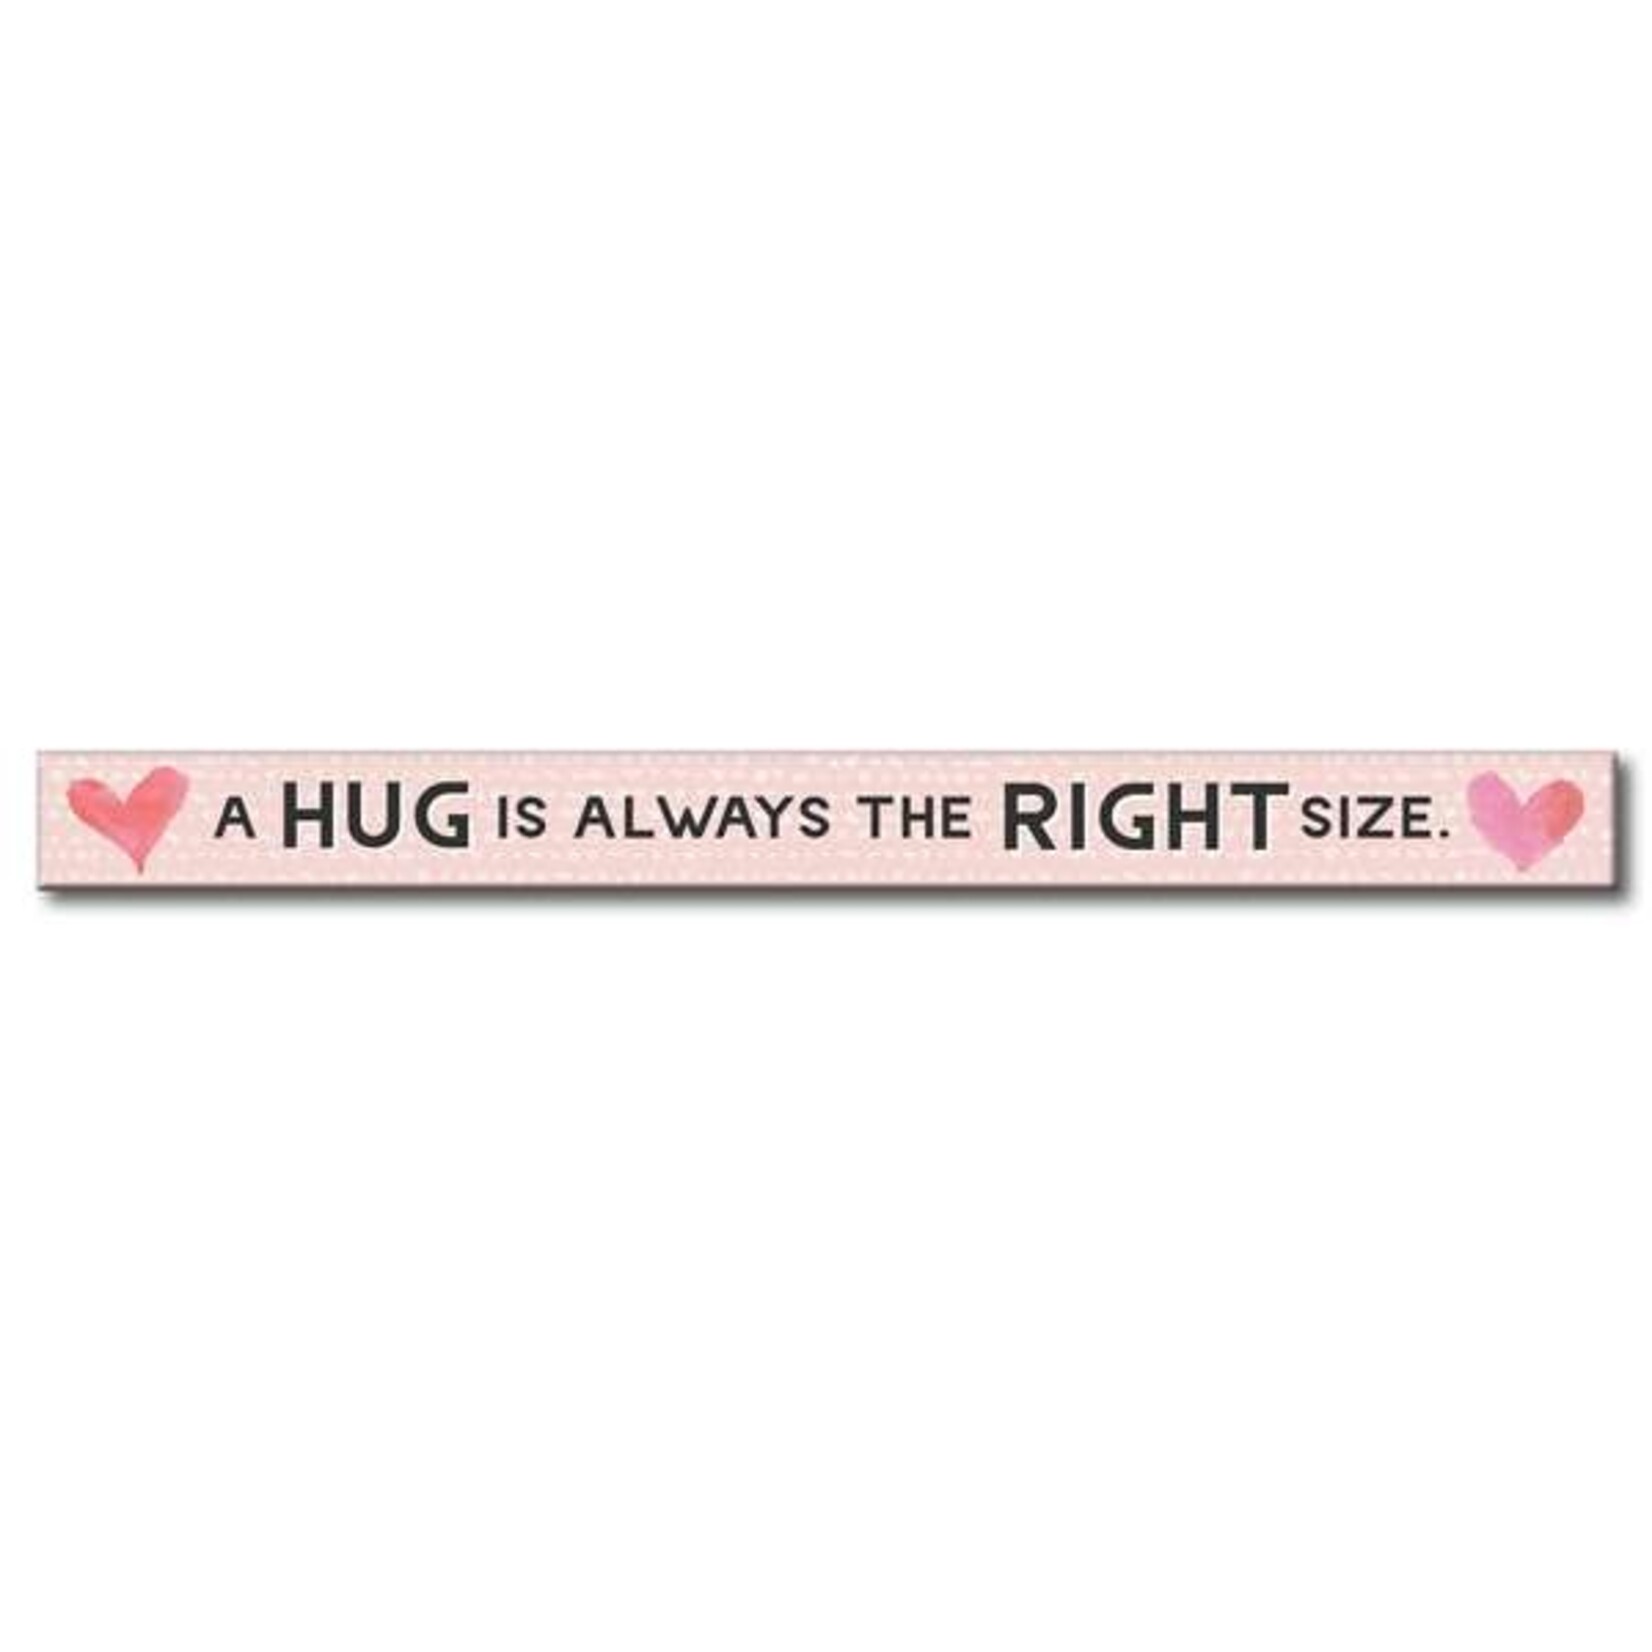 A HUG IS ALWAYS THE RIGHT SIZE - Skinnies®